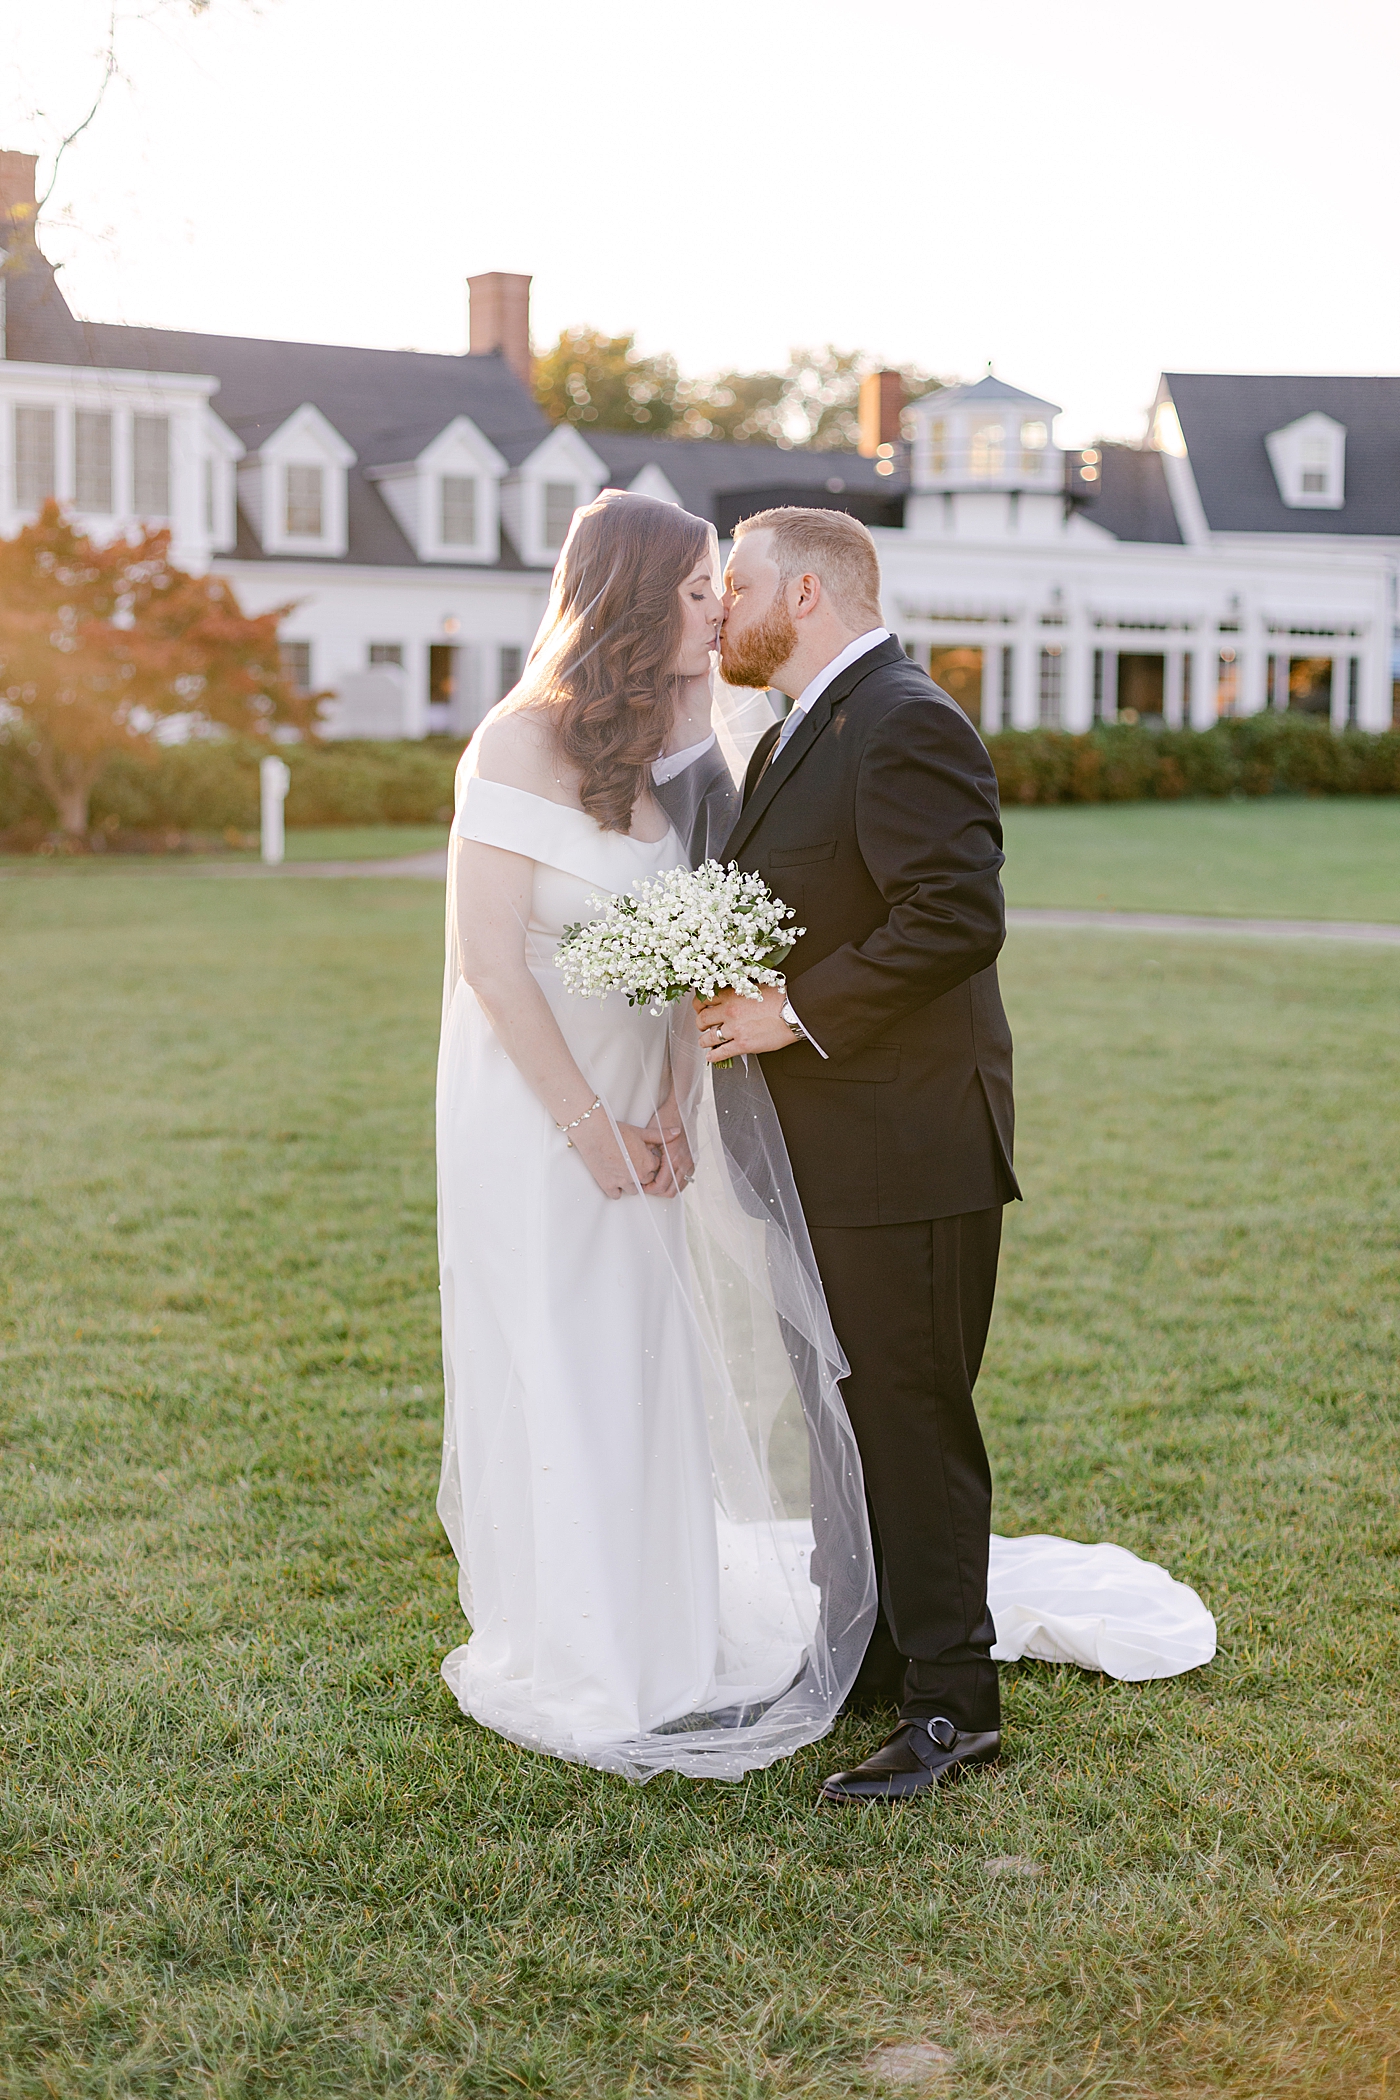 Bride and groom kissing after their Inn at perry cabin wedding | Photo by Hope Helmuth Photography